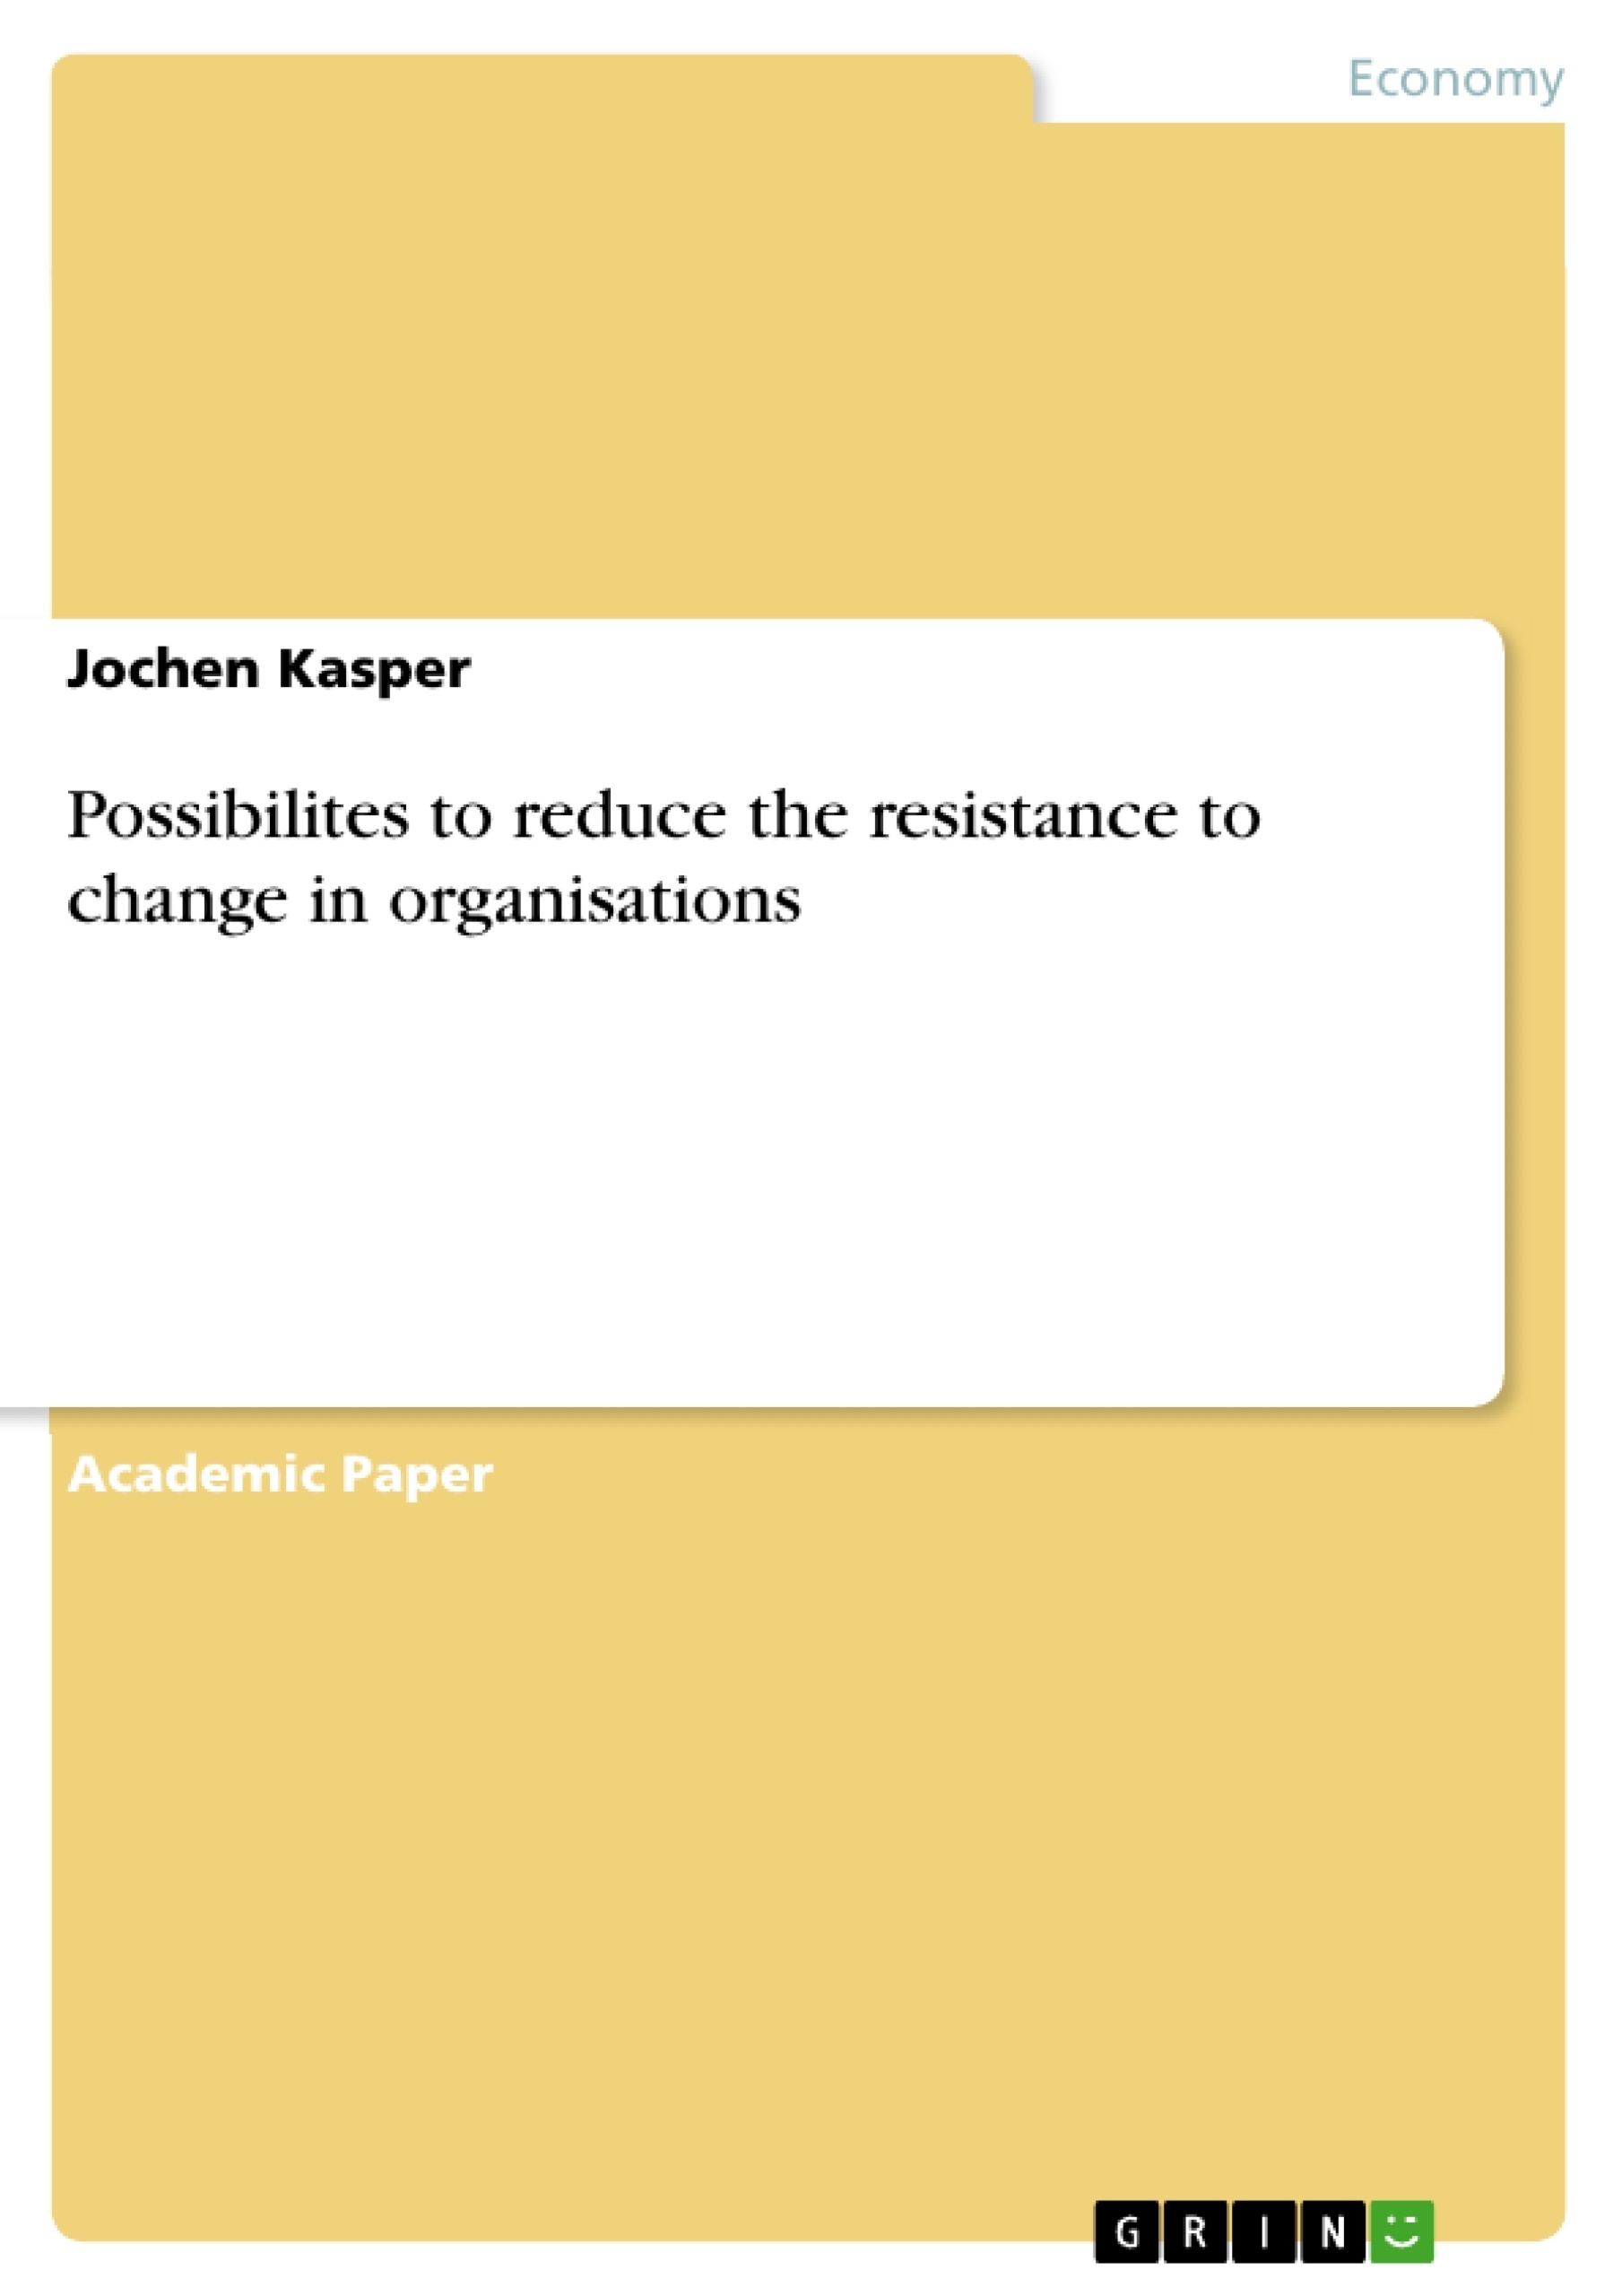 Titel: Possibilites to reduce the resistance to change in organisations